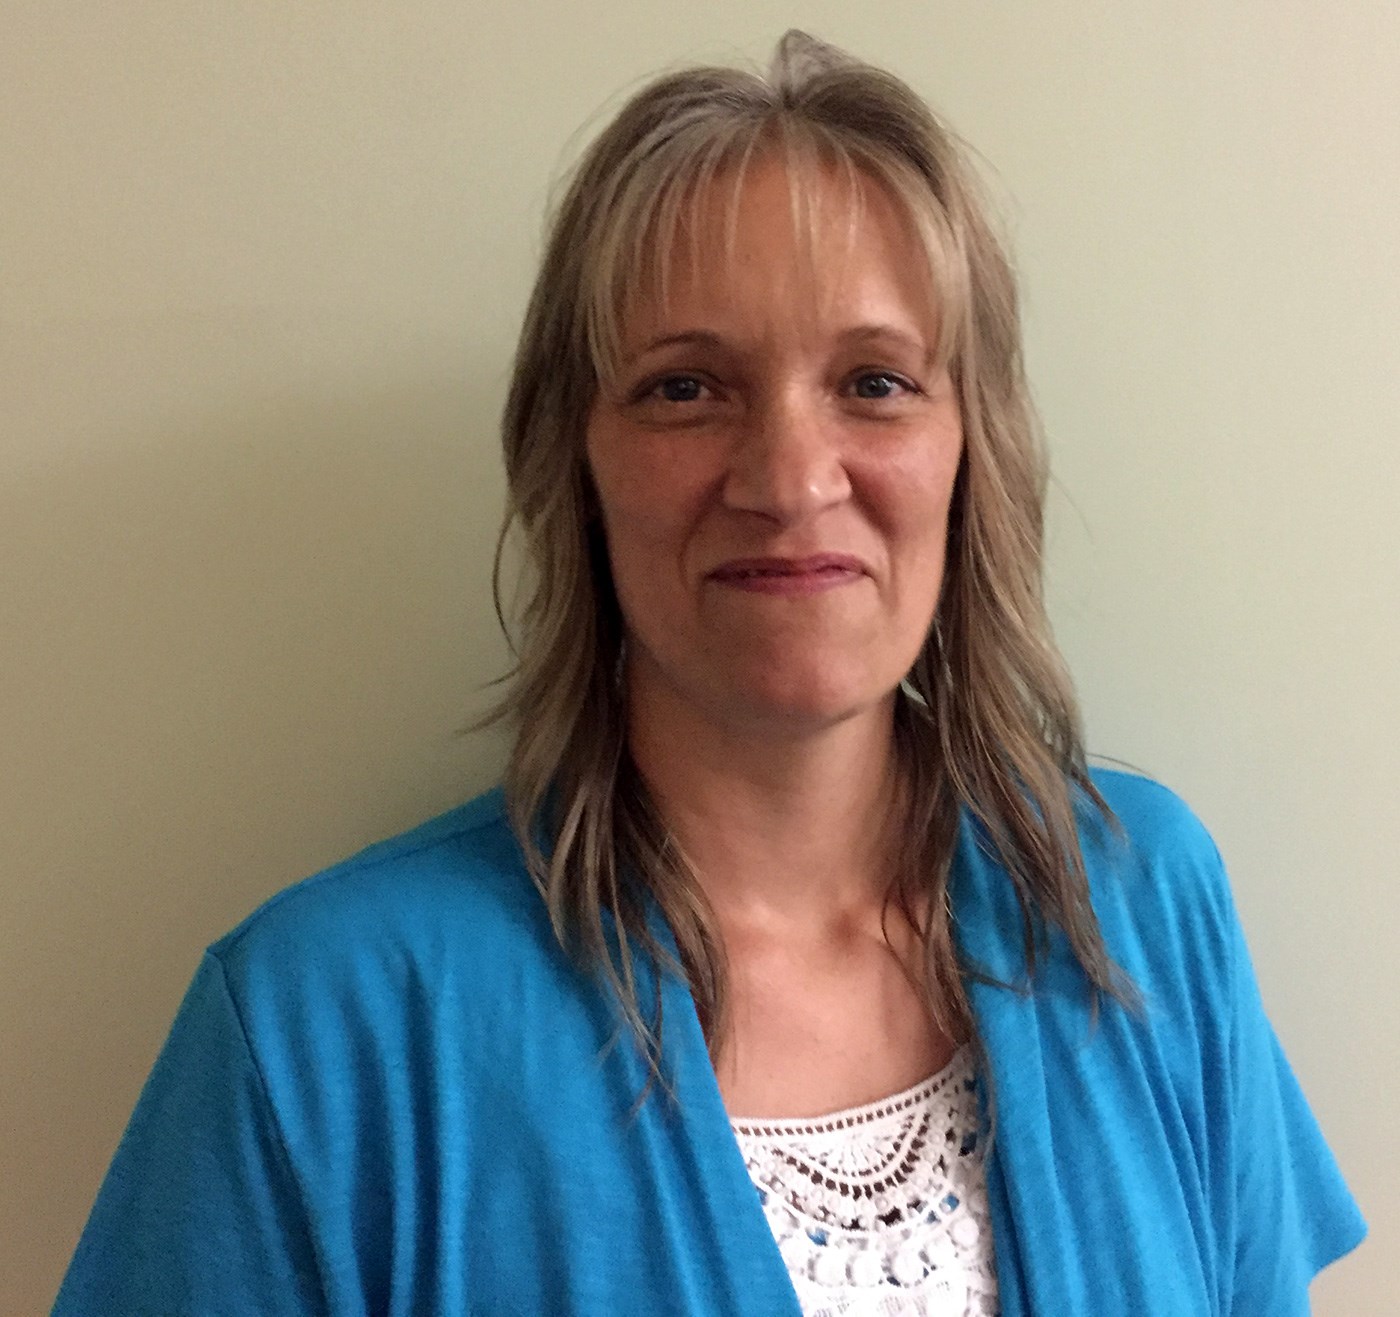 Diane Nocco is a Visiting Instructor in the Biomedical & Nutritional Sciences Department at UMass Lowell.